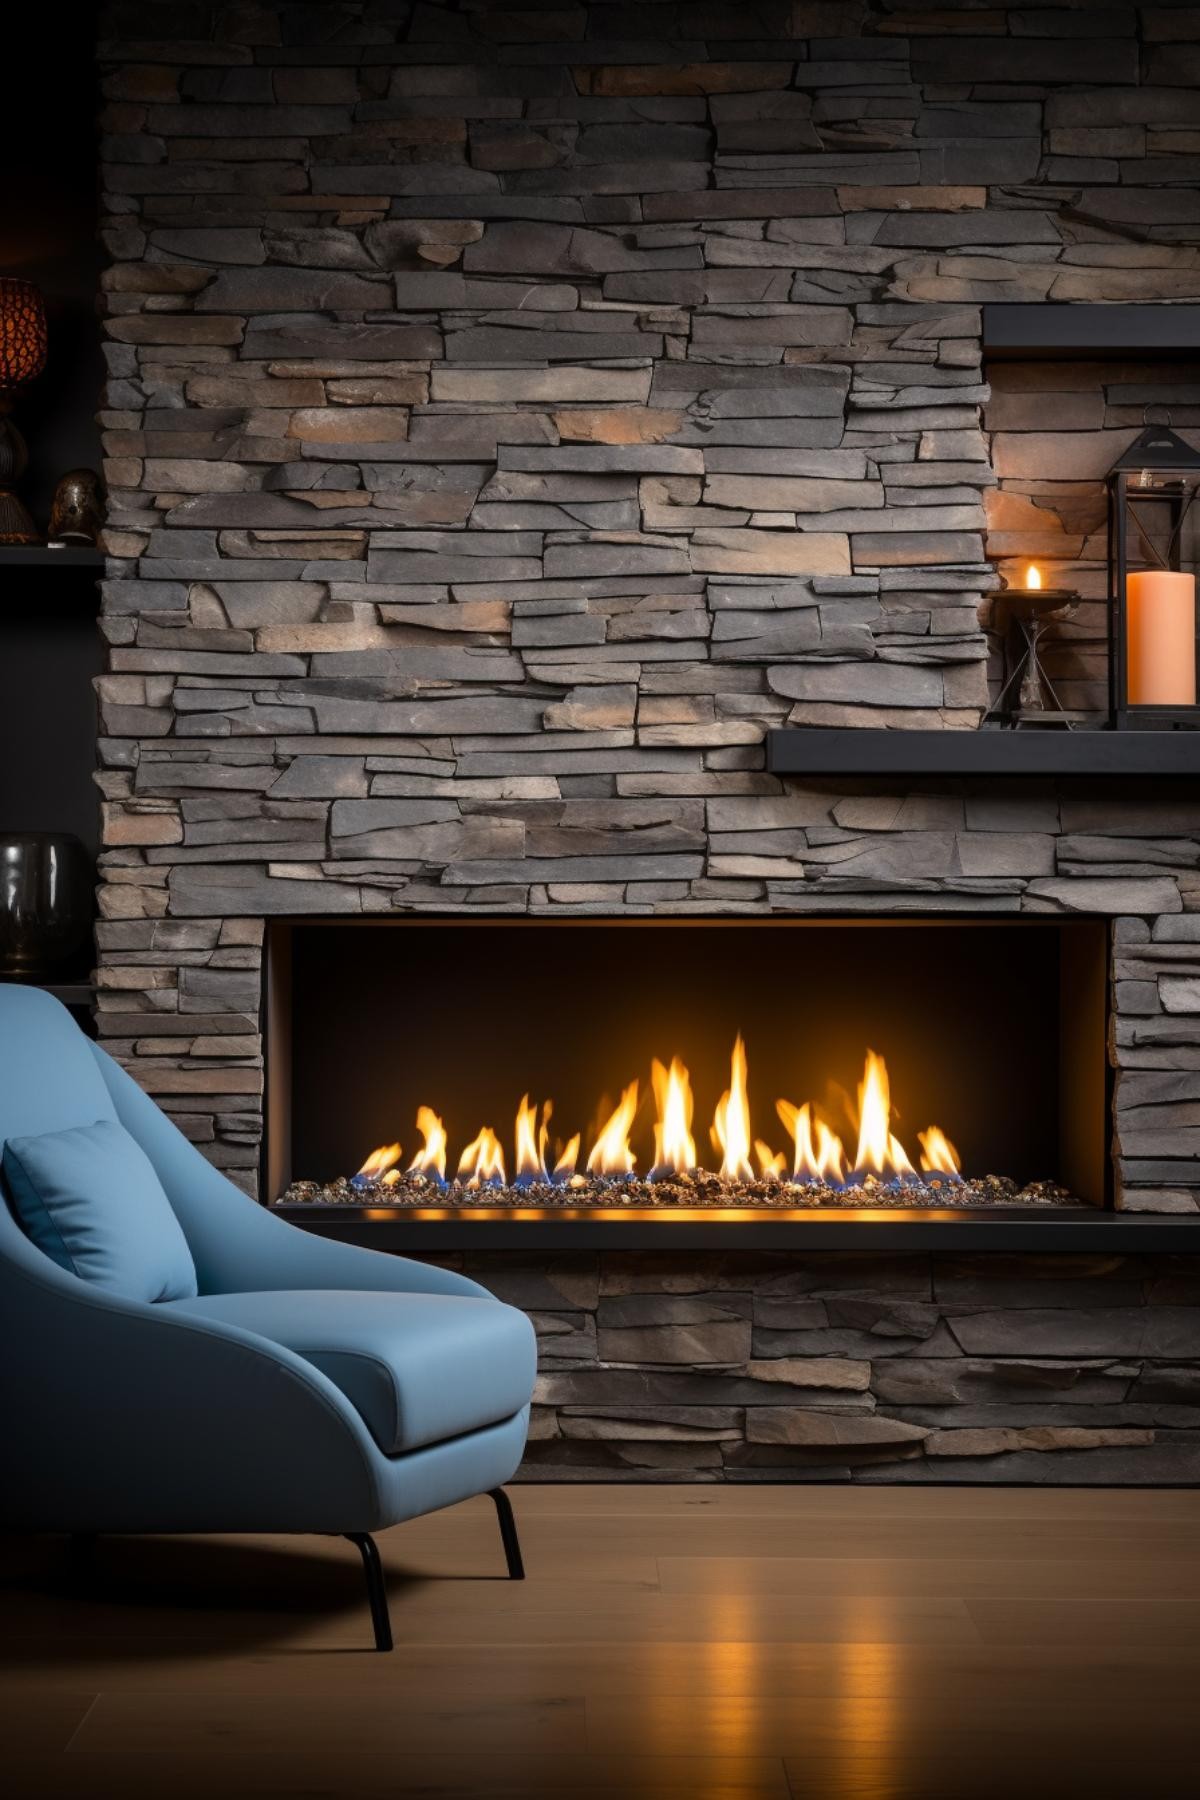 Sleek and Contemporary Stone Fireplace